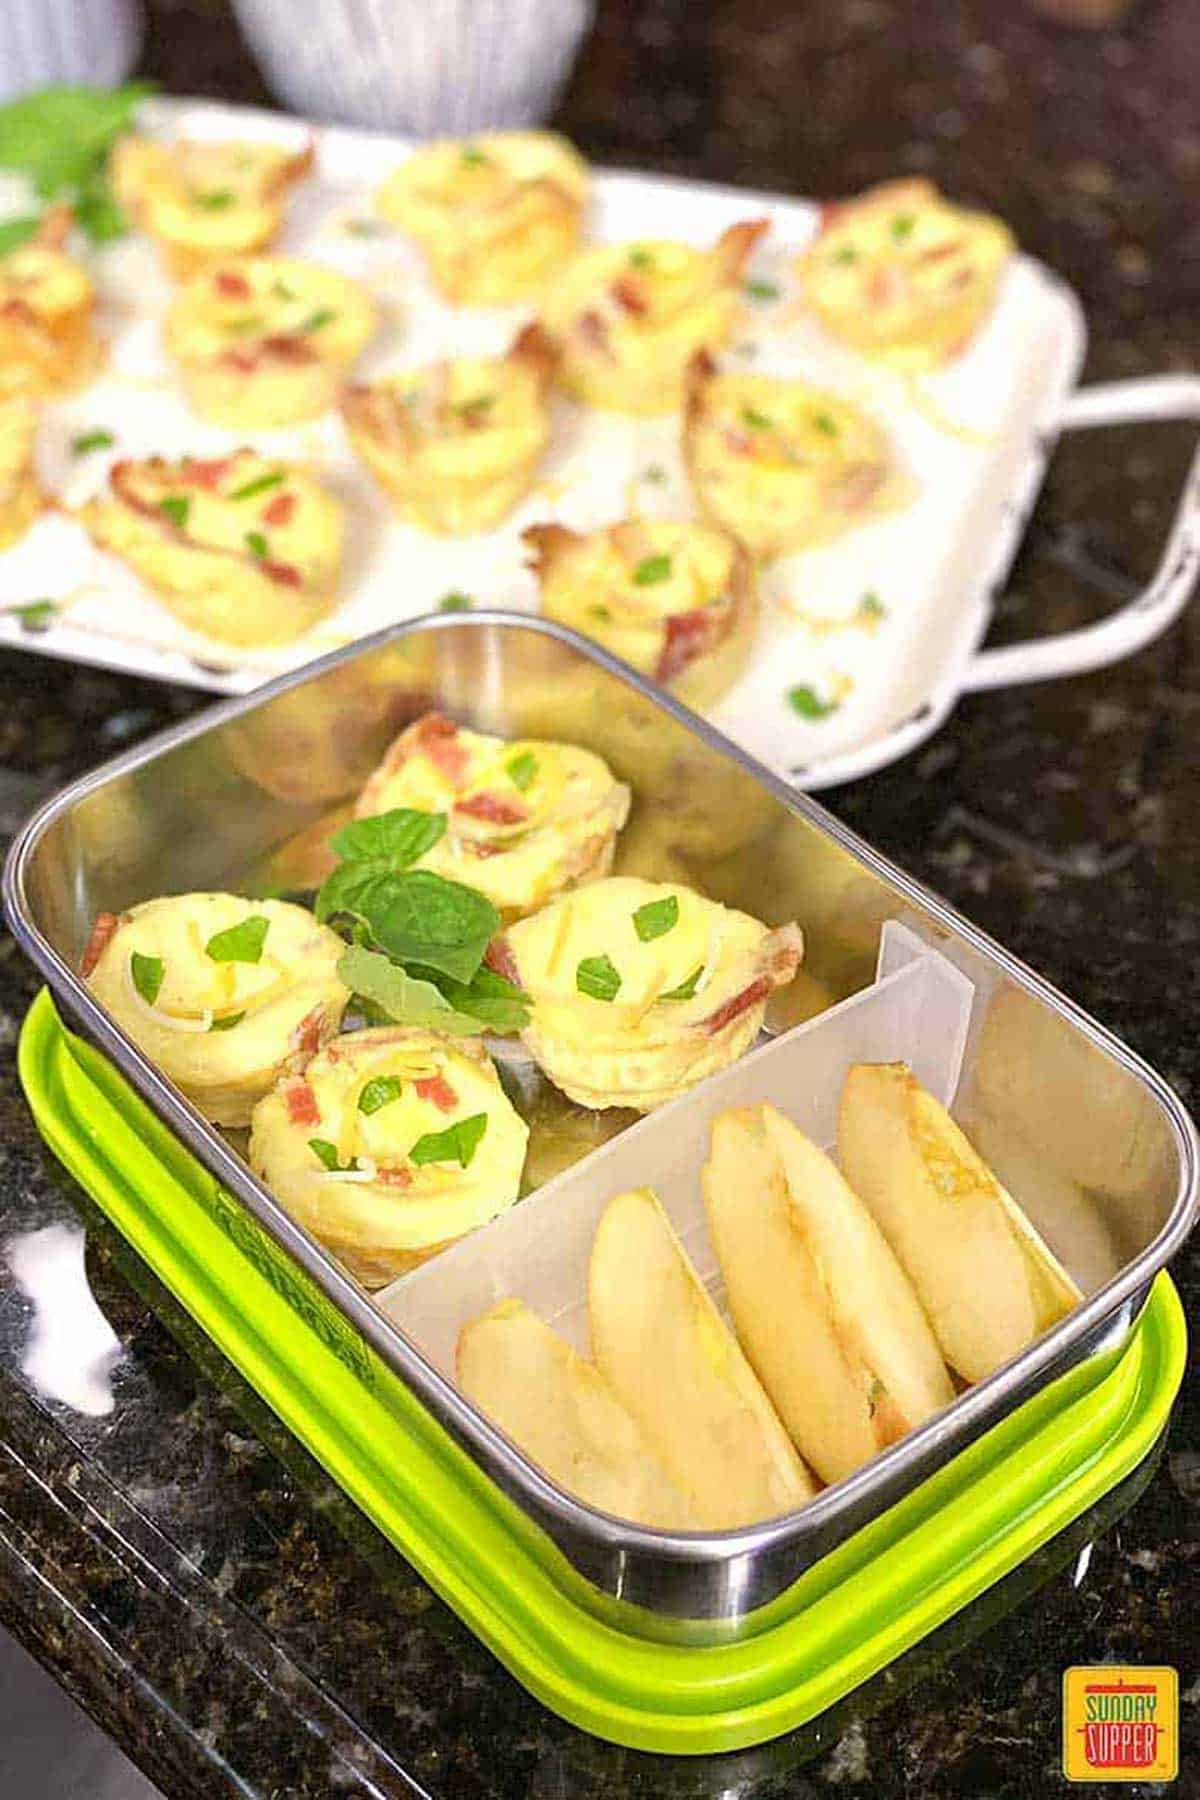 Starbucks egg bites in a bento box with apple slices for an on-the-go breakfast